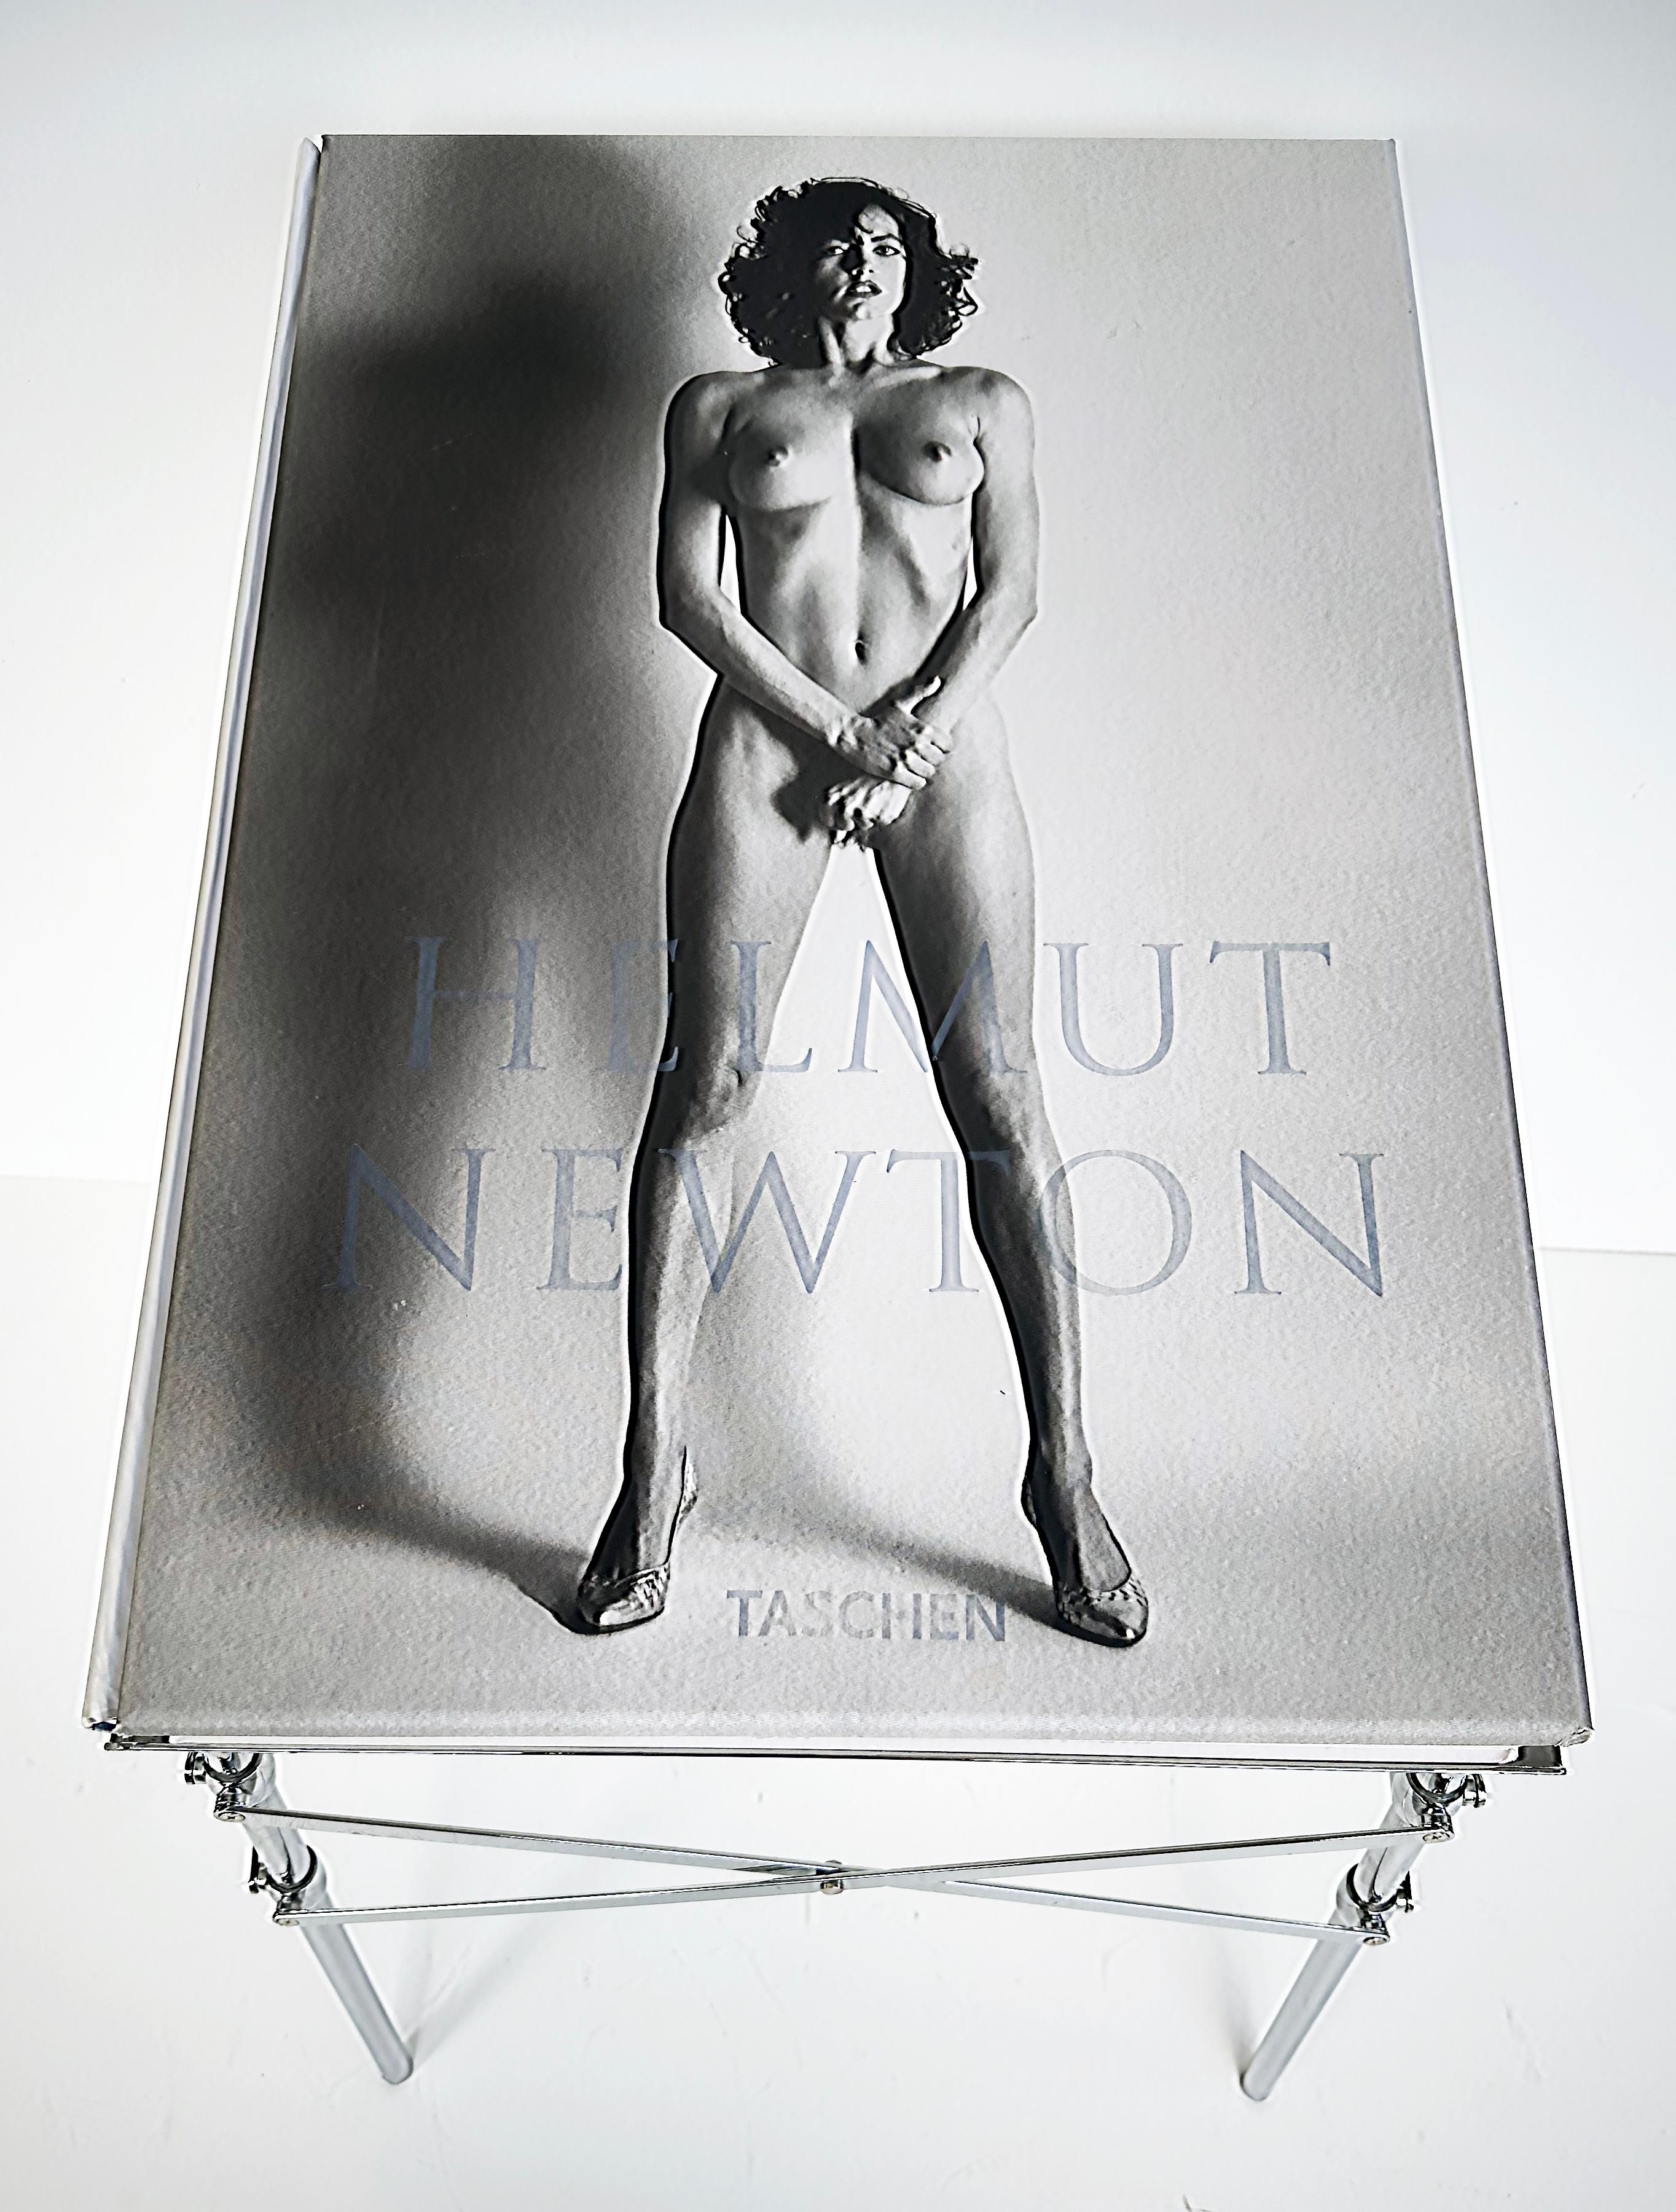 Paper Helmut Newton Sumo Taschen Book, Philippe Starck Stand, Signed Limited Edition For Sale